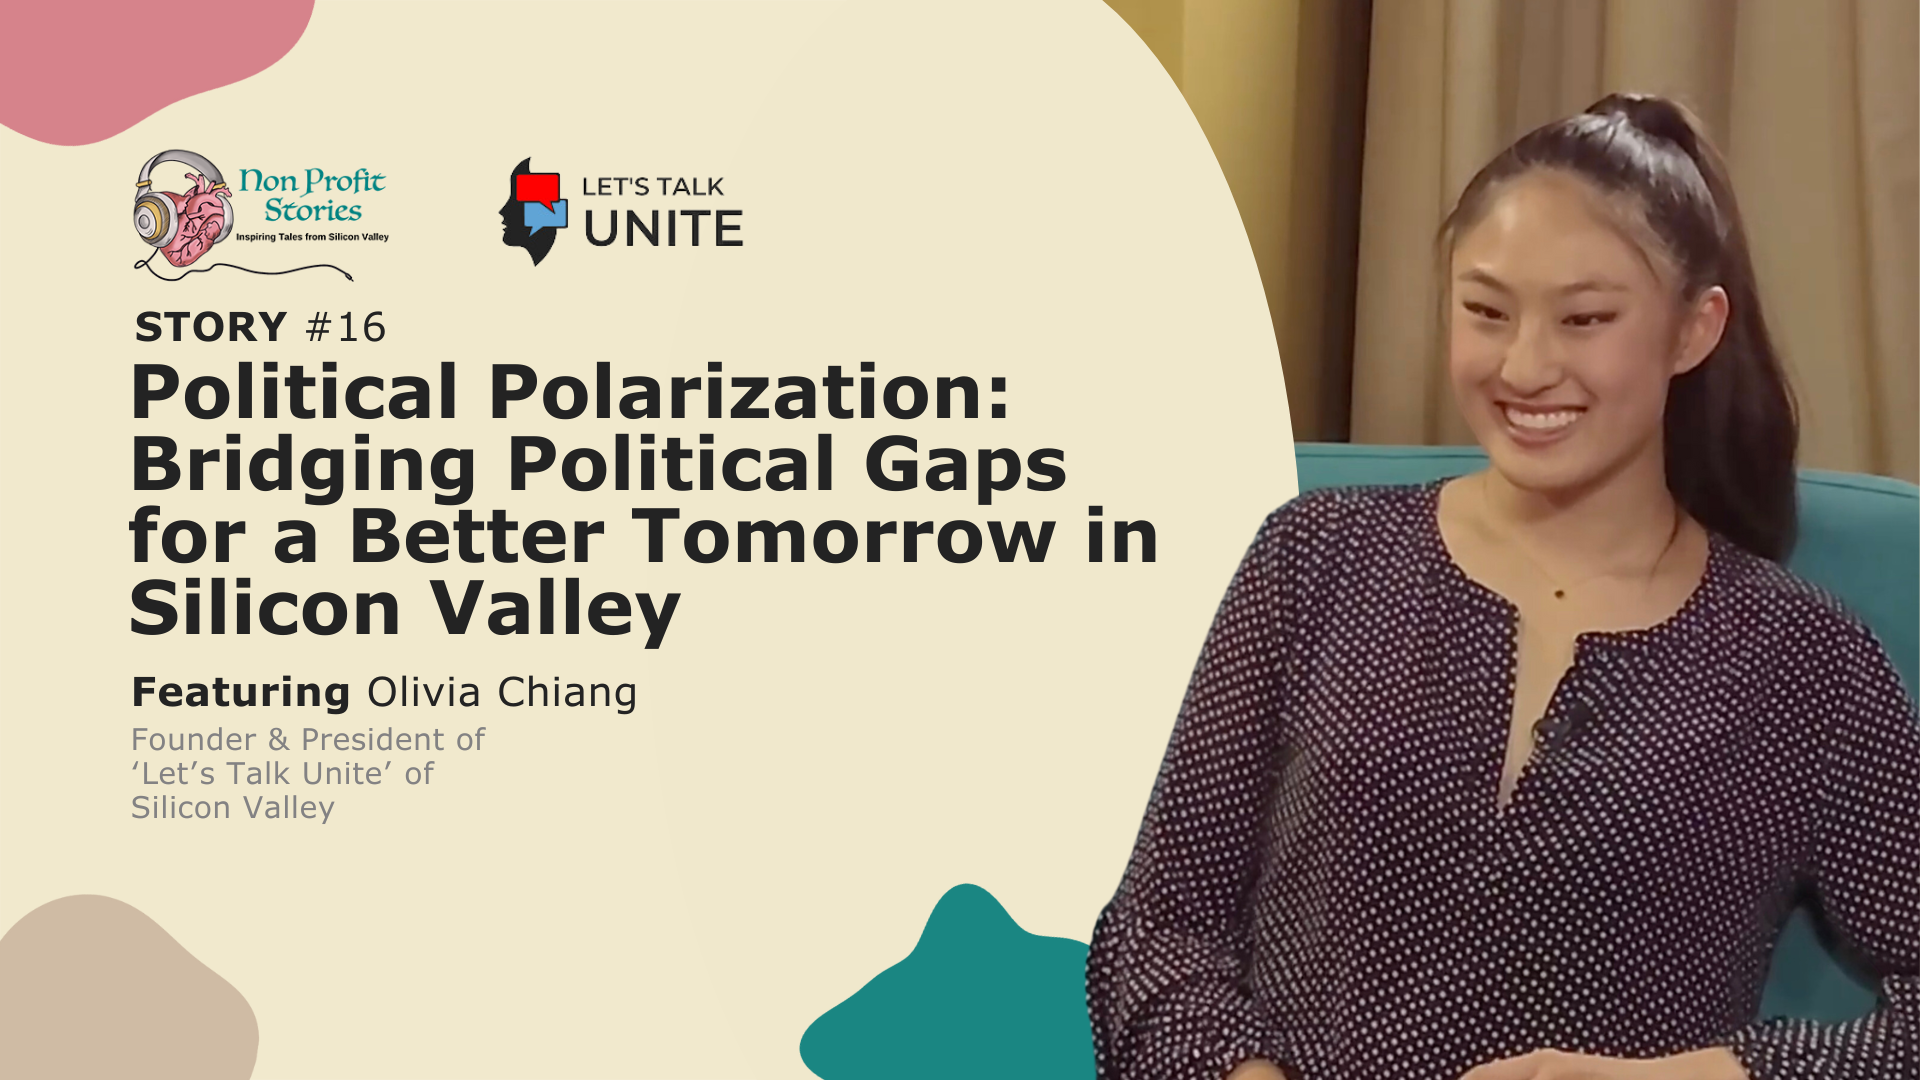 Political Polarization: Bridging Political Gaps for a Better Tomorrow in Silicon Valley Video